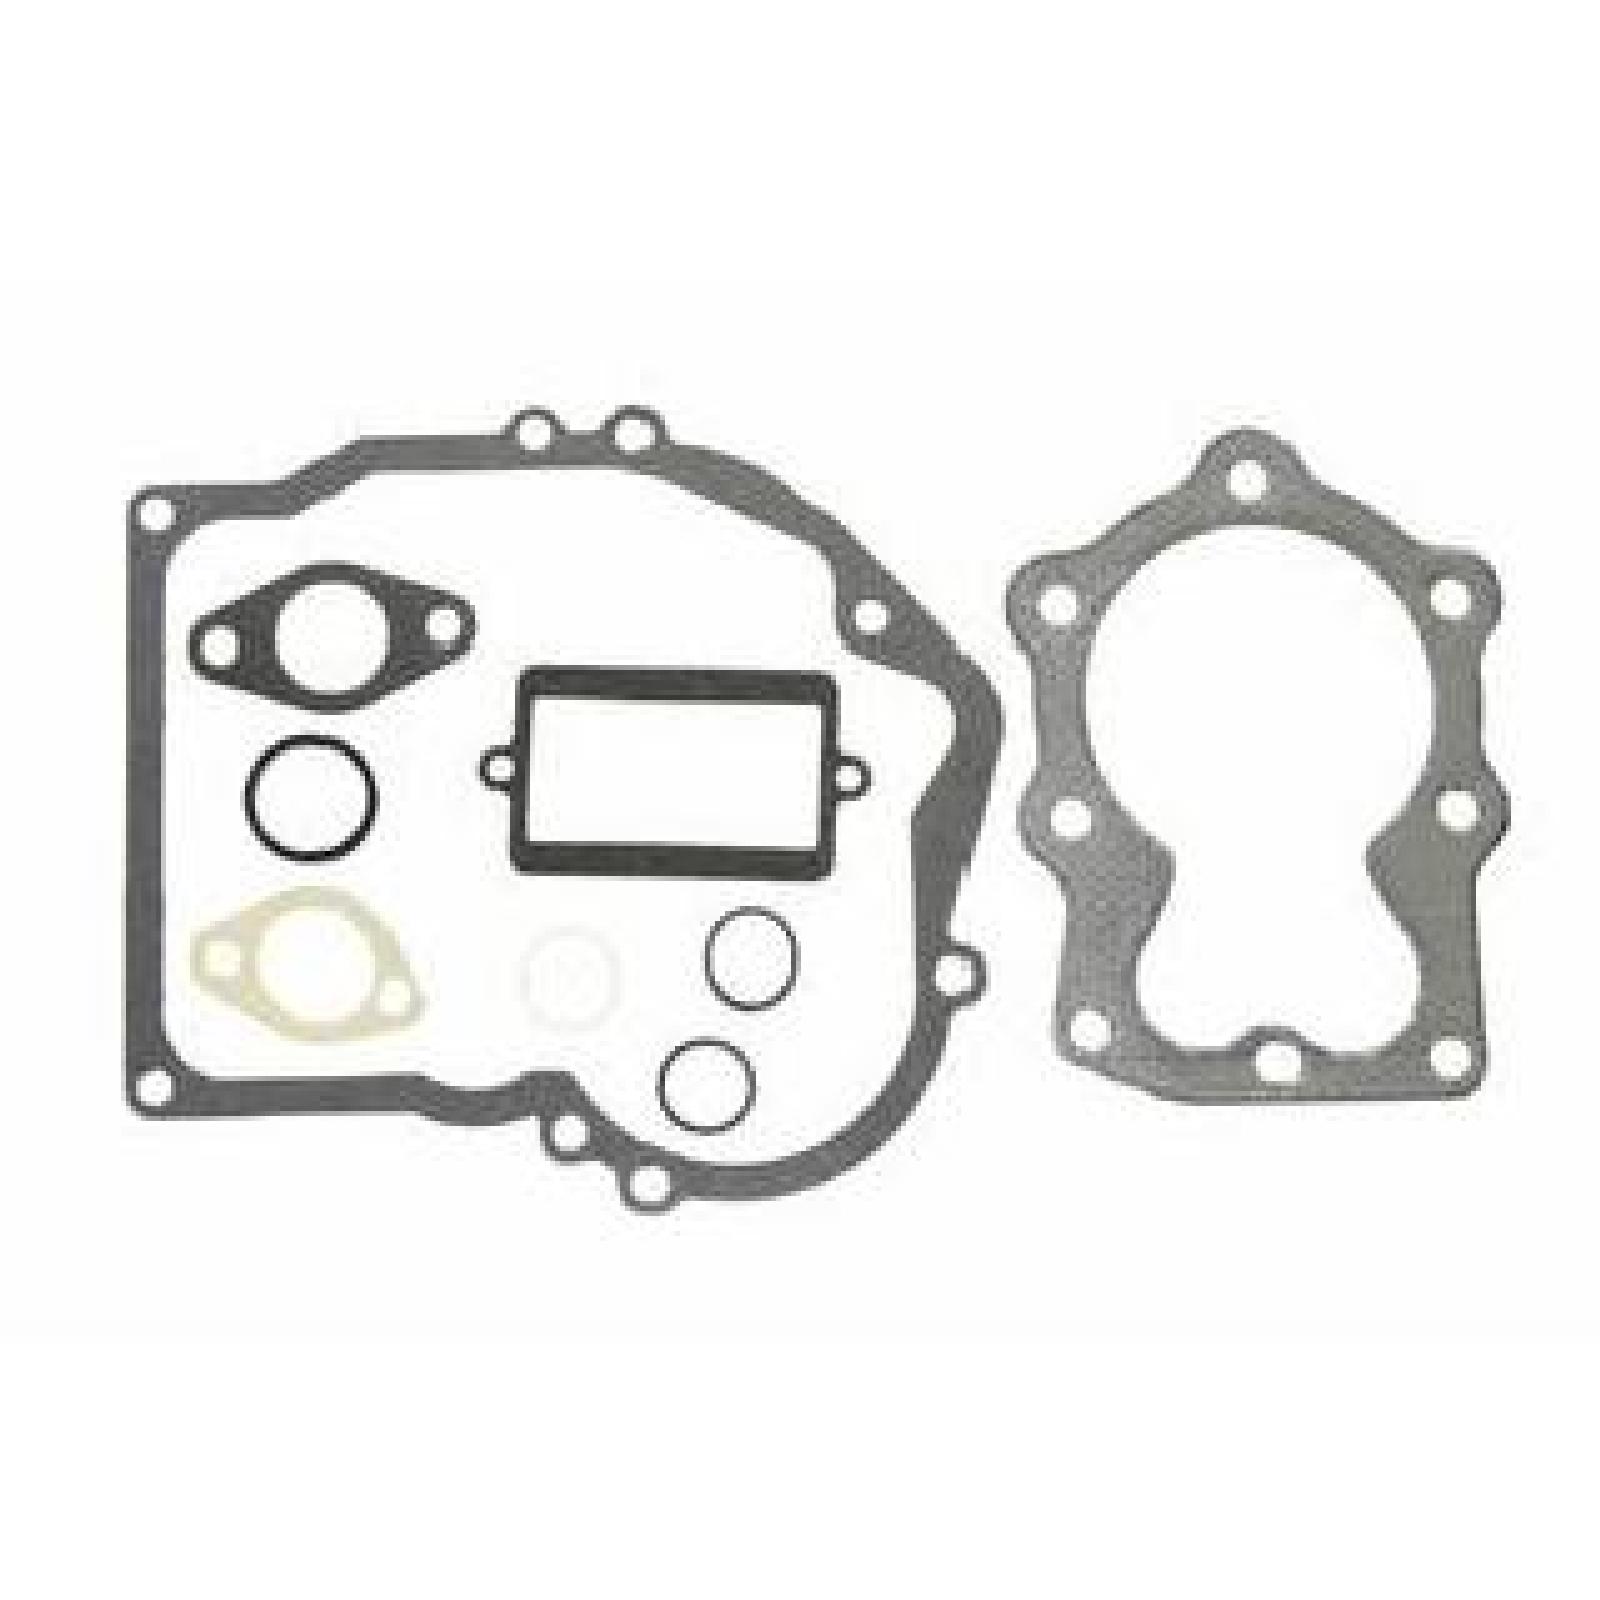 GASKET SET part# 36792C by Tecumseh - Click Image to Close